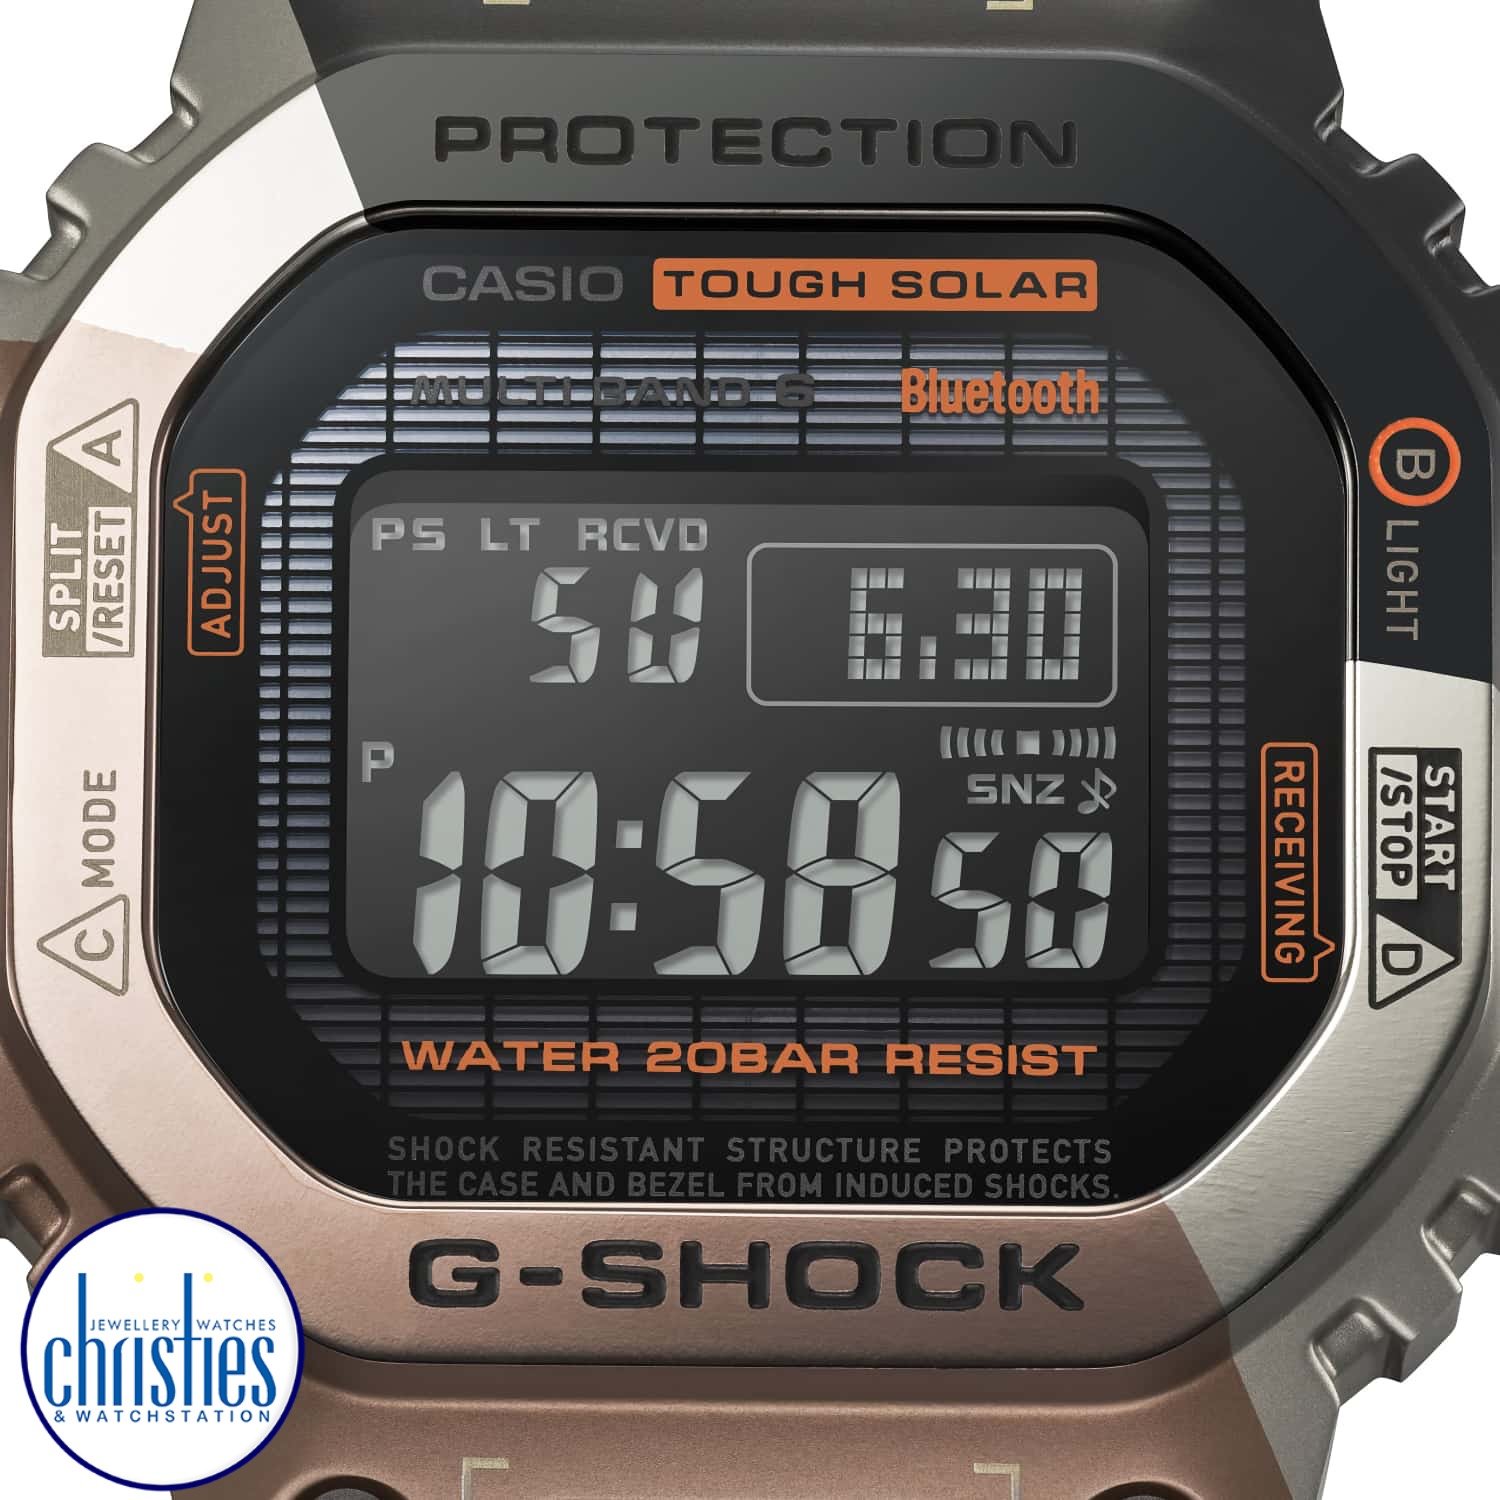 GMWB5000TVB-1D G-Shock Titanium Geometric Camo Watch. Up your game with some serious timekeeping.